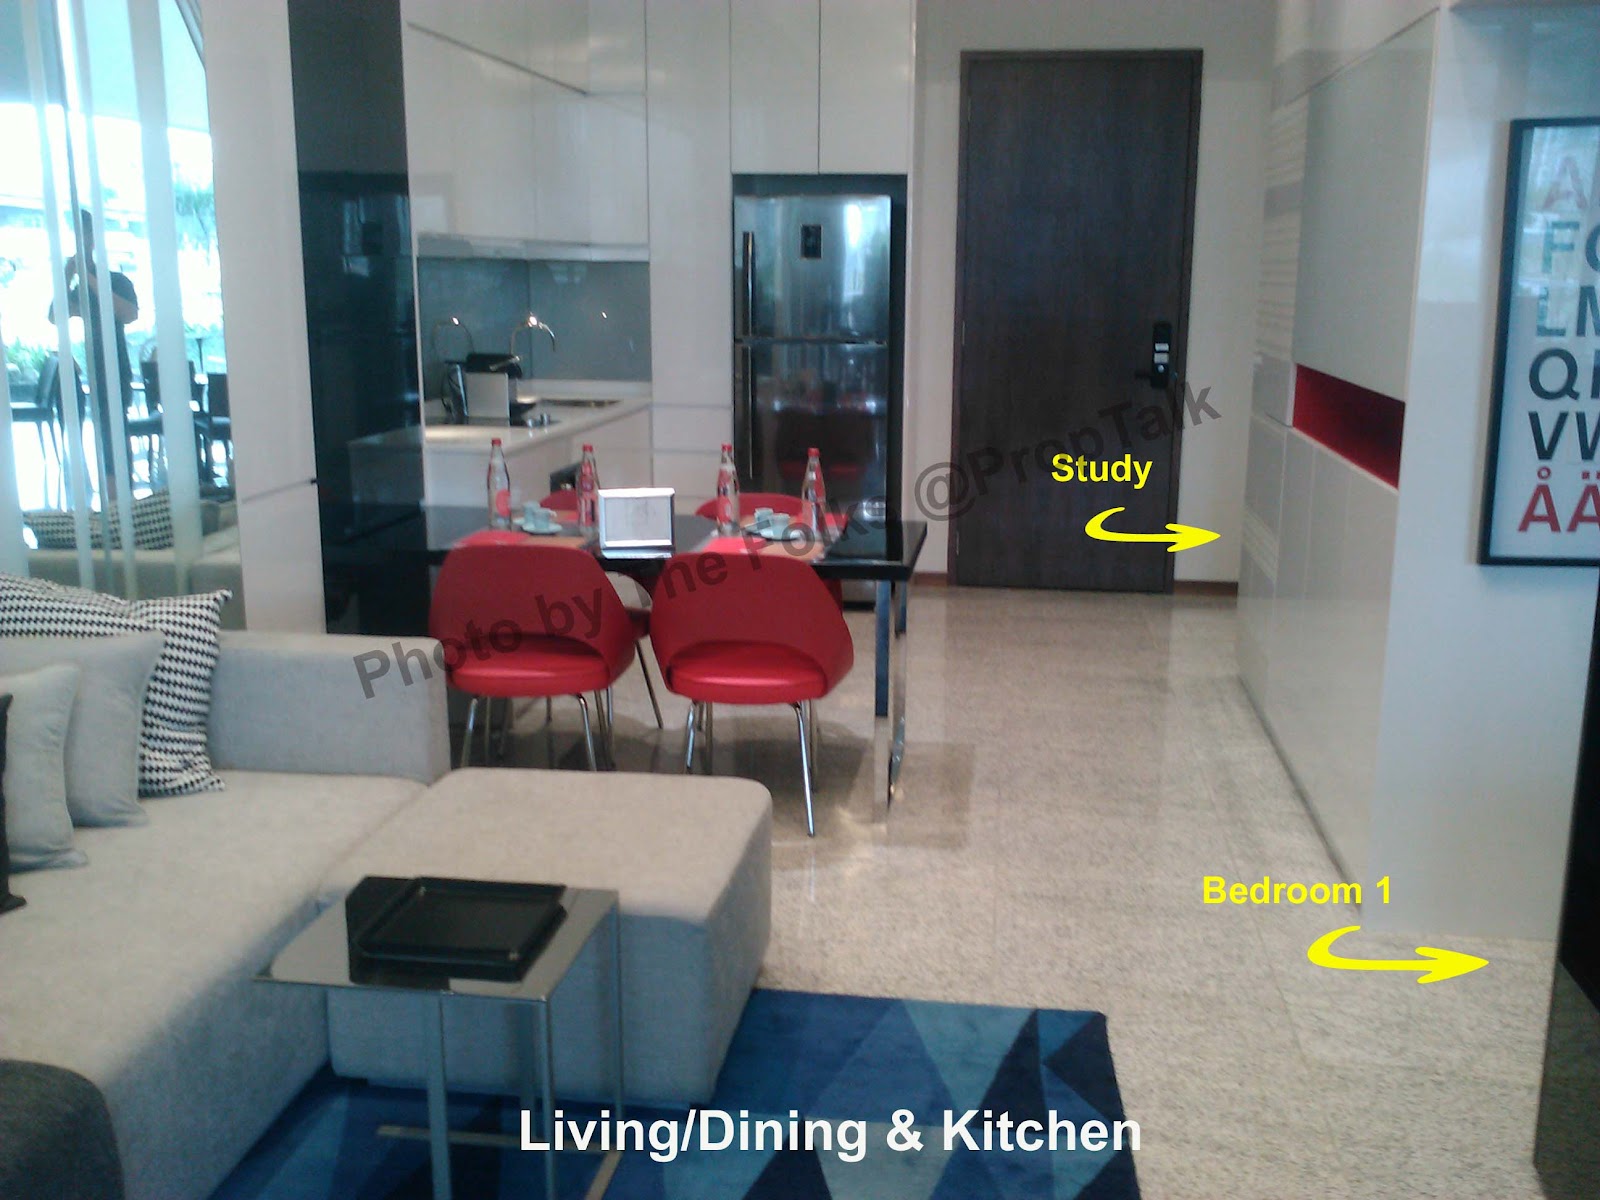 The living/dining/kitchen area is surprisingly spacious for an unit of  title=